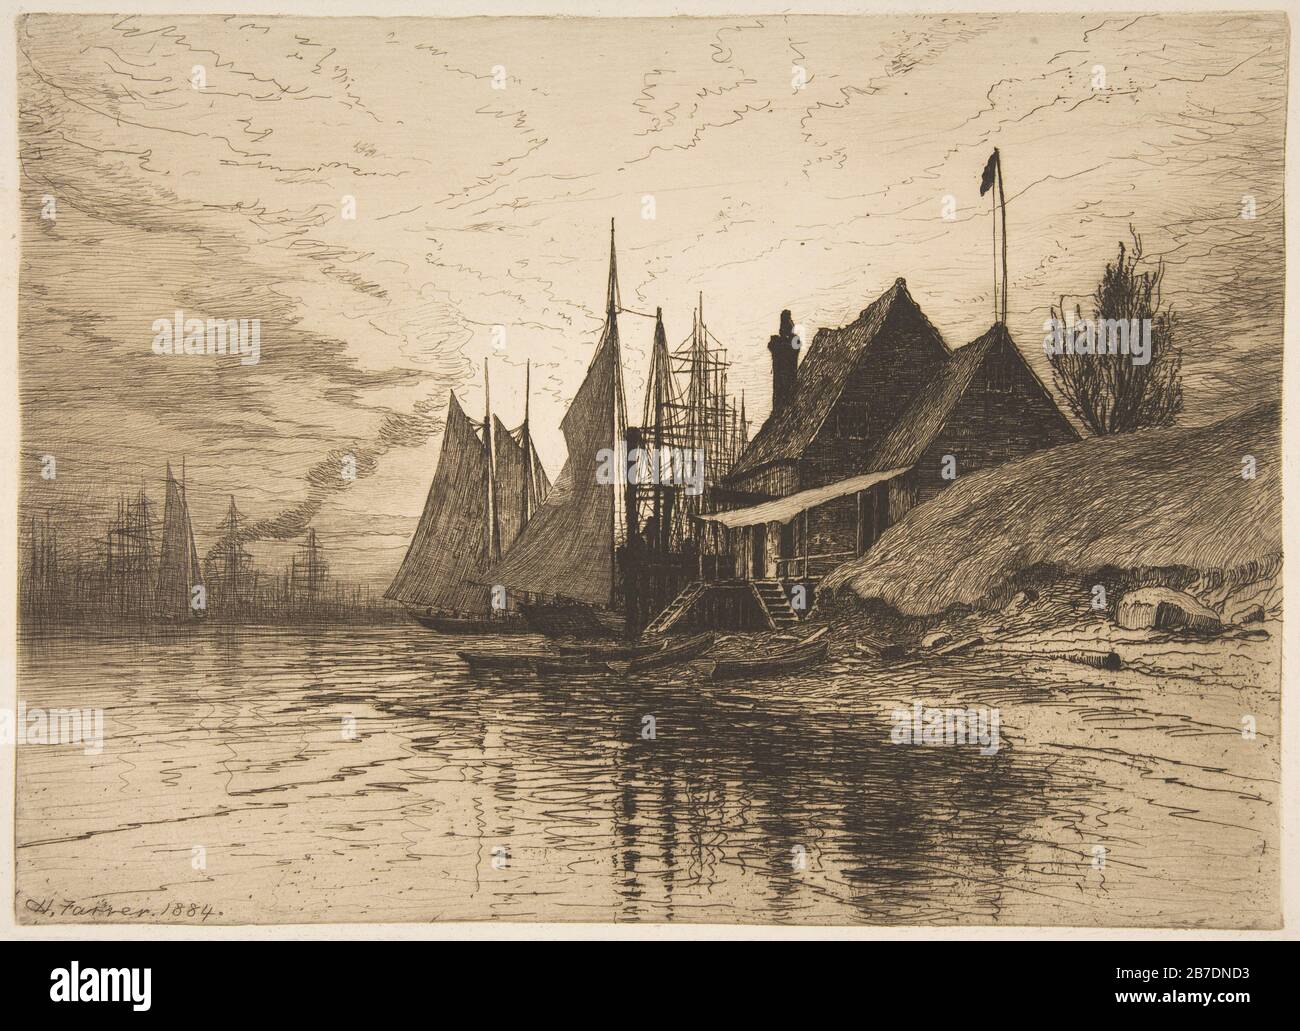 http://www.metmuseum.org/art/collection/search/381008 Artist: Henry Farrer, American, London 1844?1903 New York, Evening, New York Harbor, 1884, Etching, Plate: 9 3/4 ? 13 7/16 in. (24.7 ? 34.2 cm) Sheet: 14 1/16 x 18 1/8 in. (35.7 x 46.1 cm). The Metropolitan Museum of Art, New York. The Edward W. C. Arnold Collection of New York Prints, Maps and Pictures, Bequest of Edward W. C. Arnold, 1954 (54.90.946) Stock Photo